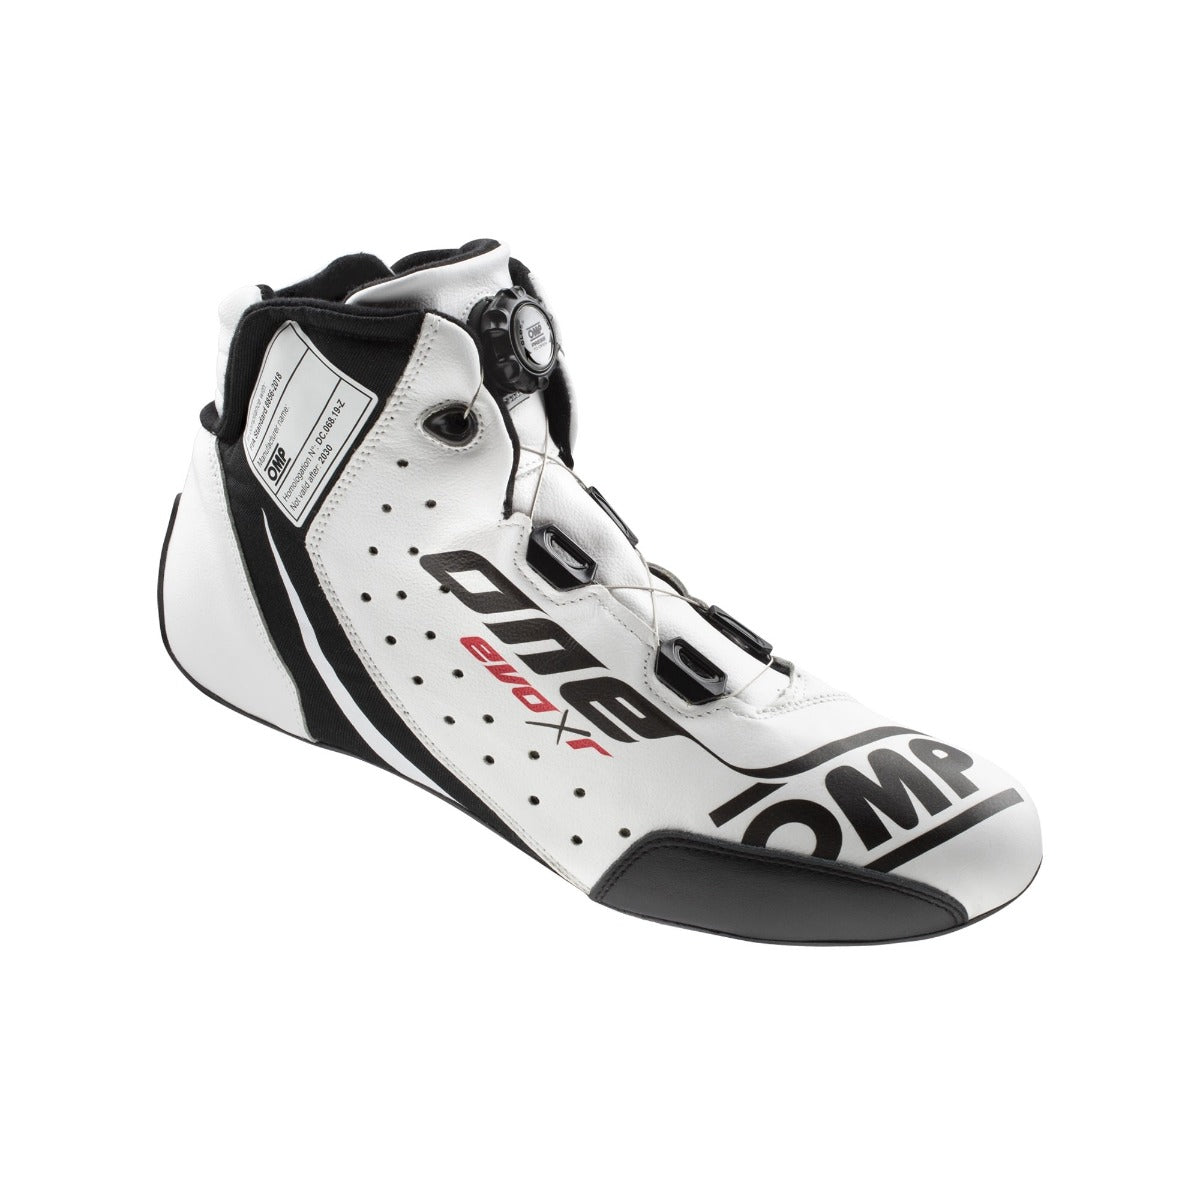 OMP One Evo X R Nomex Race Shoe in white